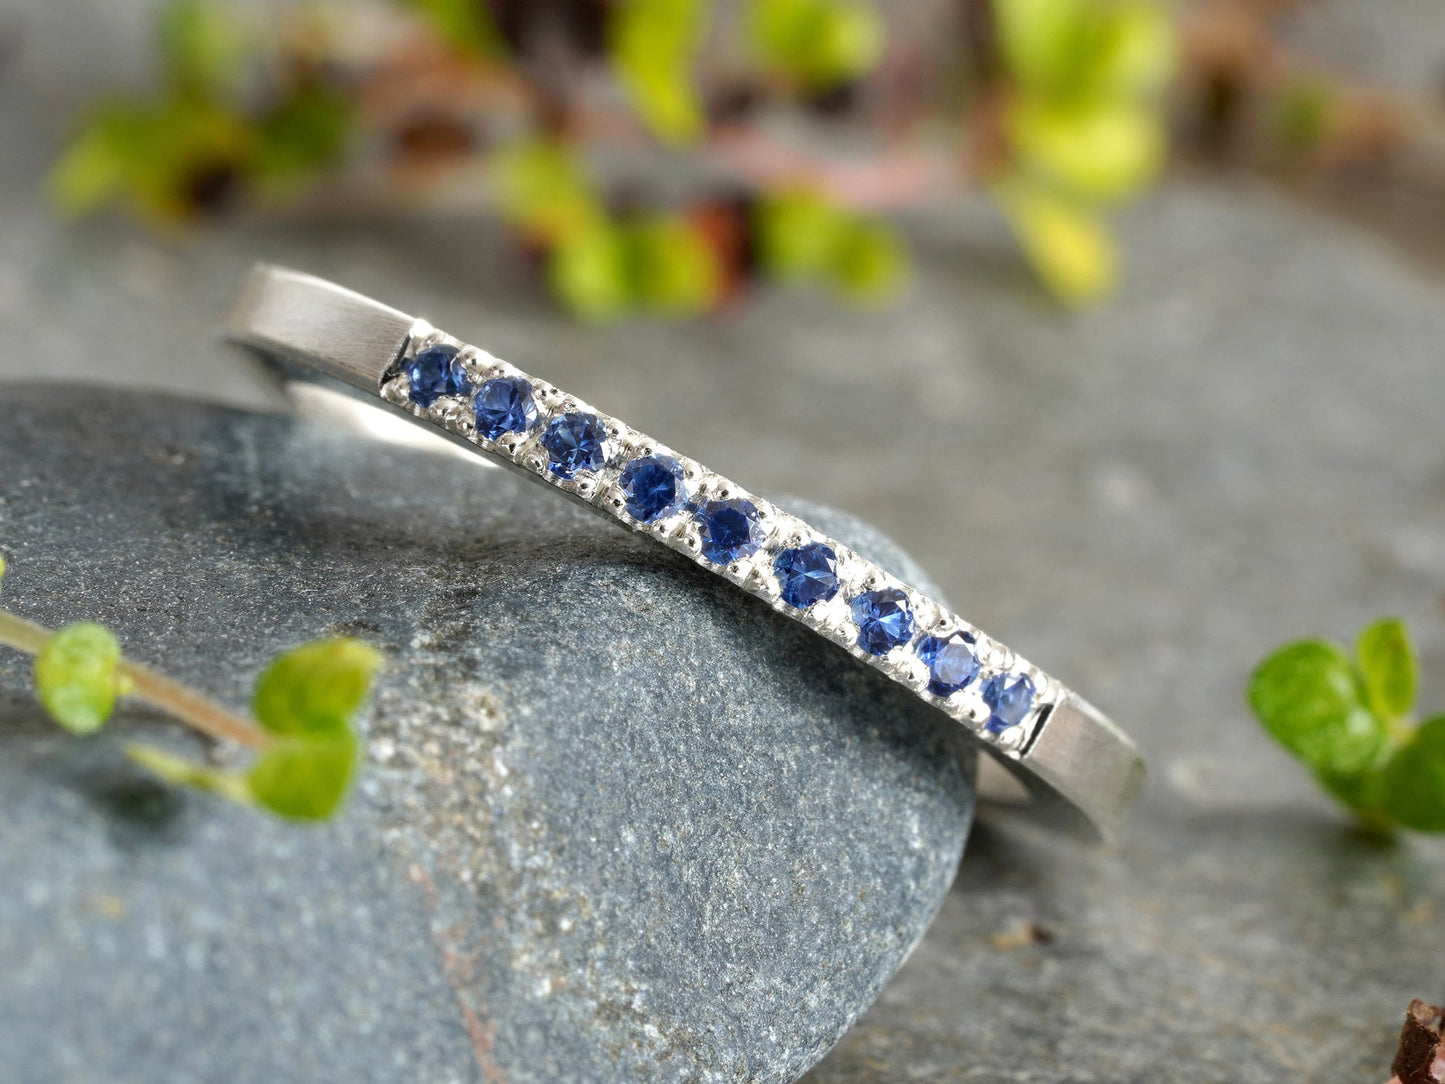 Sapphire Eternity Wedding Ring, Sapphire Anniversary Ring, Sapphire Wedding Band, Pave Set Sapphire Ring, Made to Order